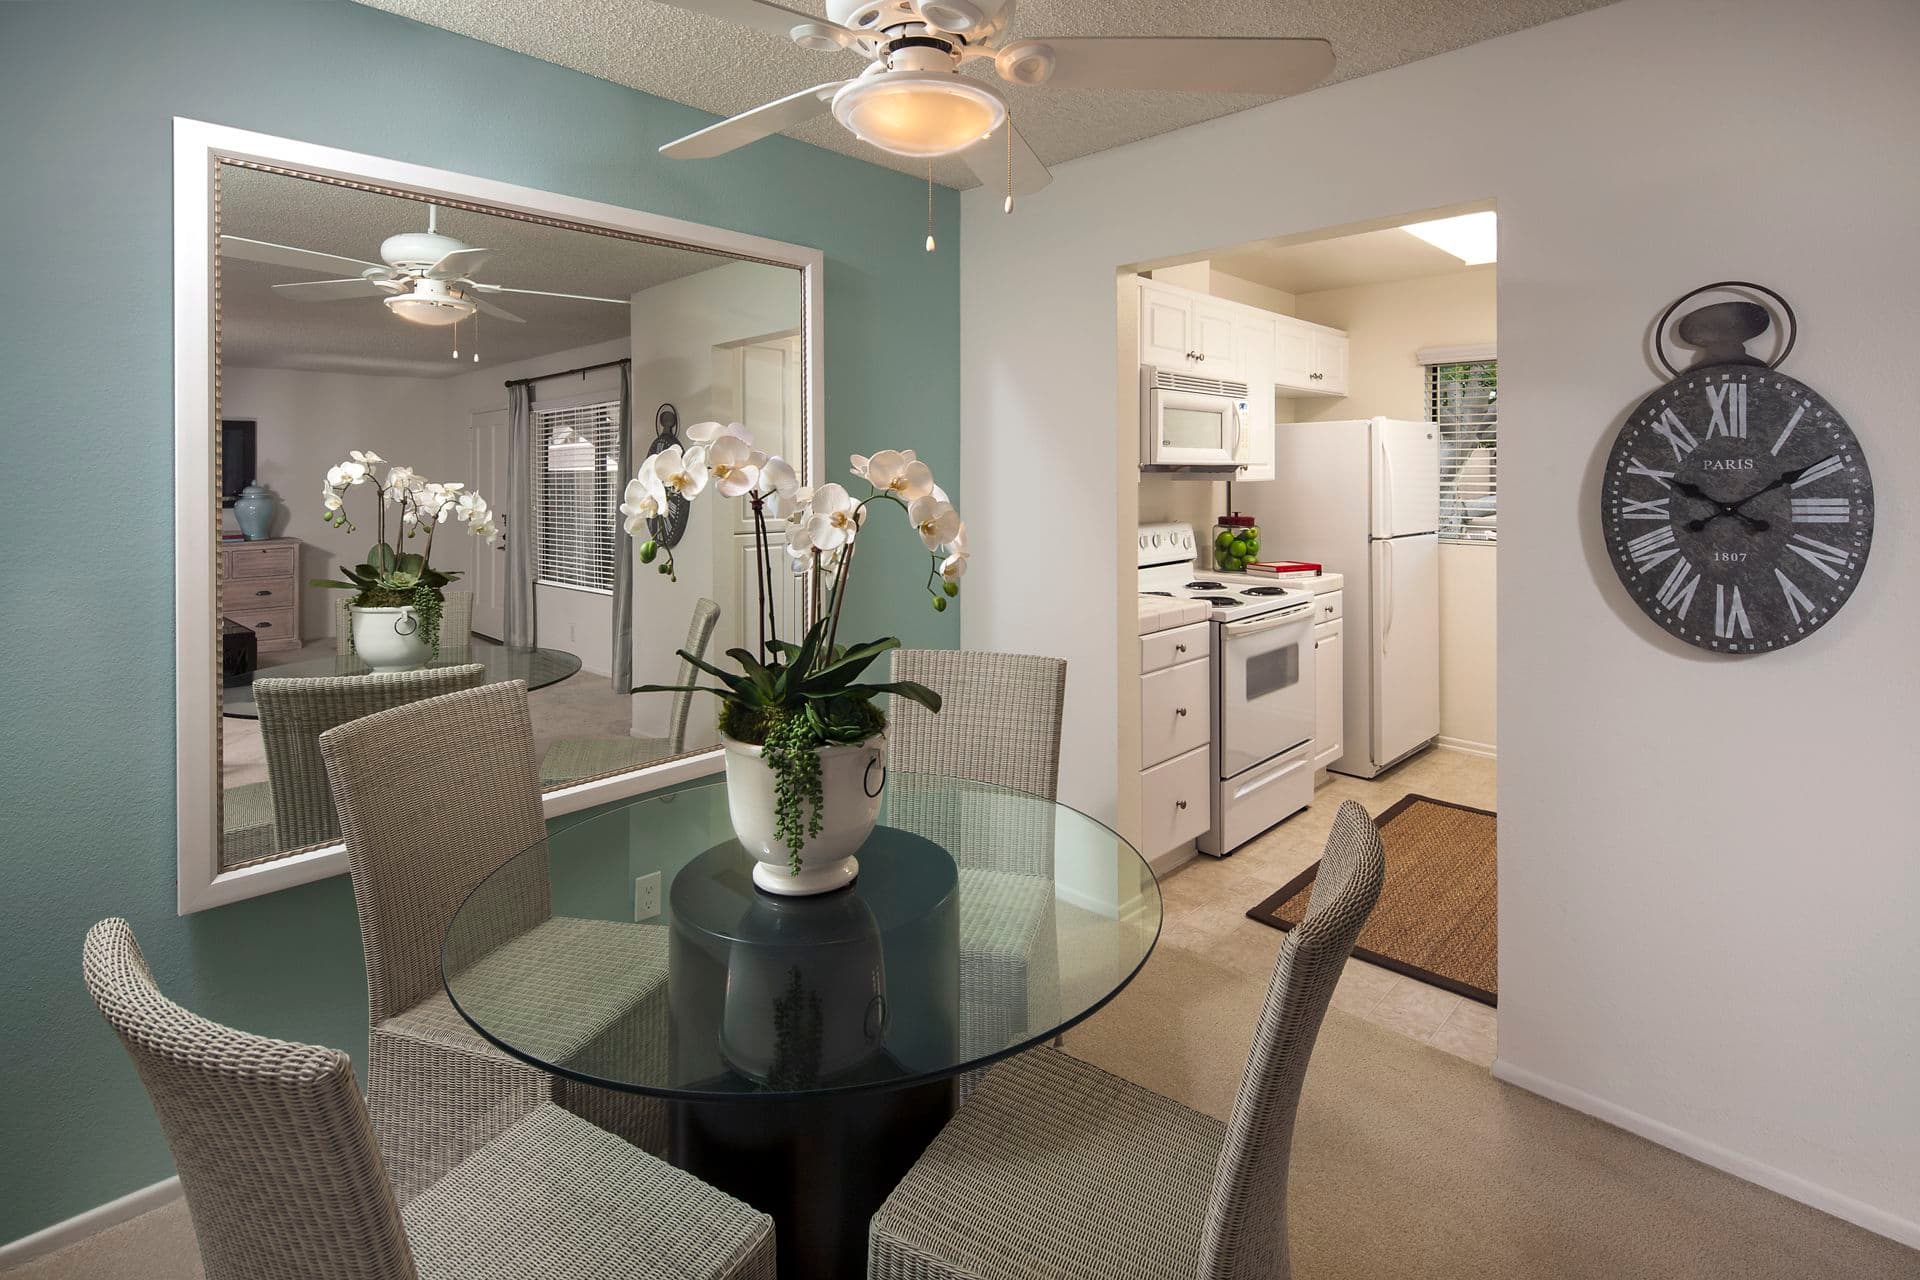 Interior view of dining room and kitchen at Parkwood Apartment Homes in Irvine, CA.